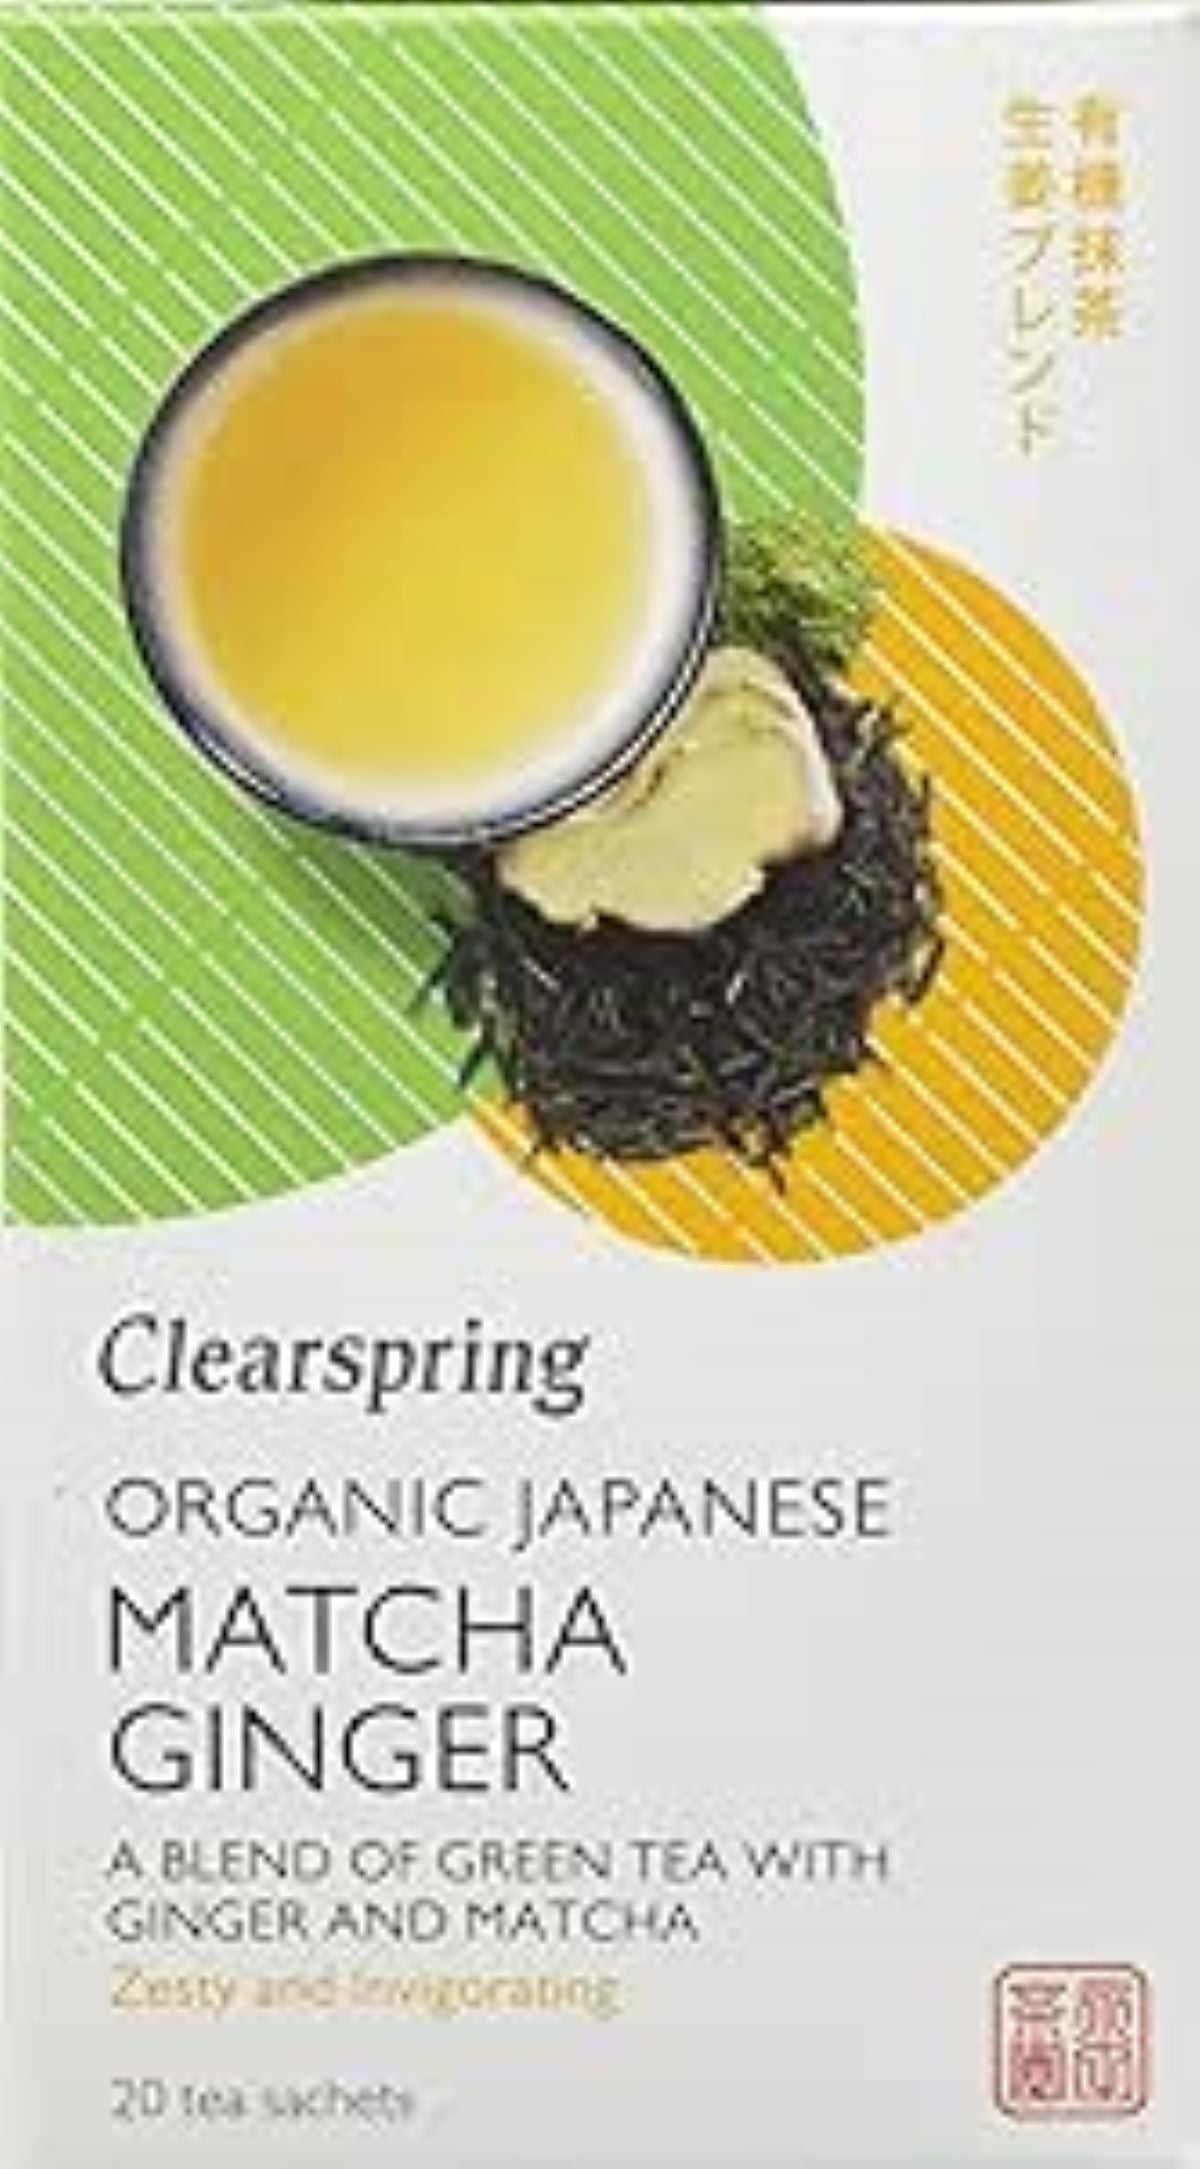 Clearspring Organic Japanese Matcha Ginger, Green Teabags 36g